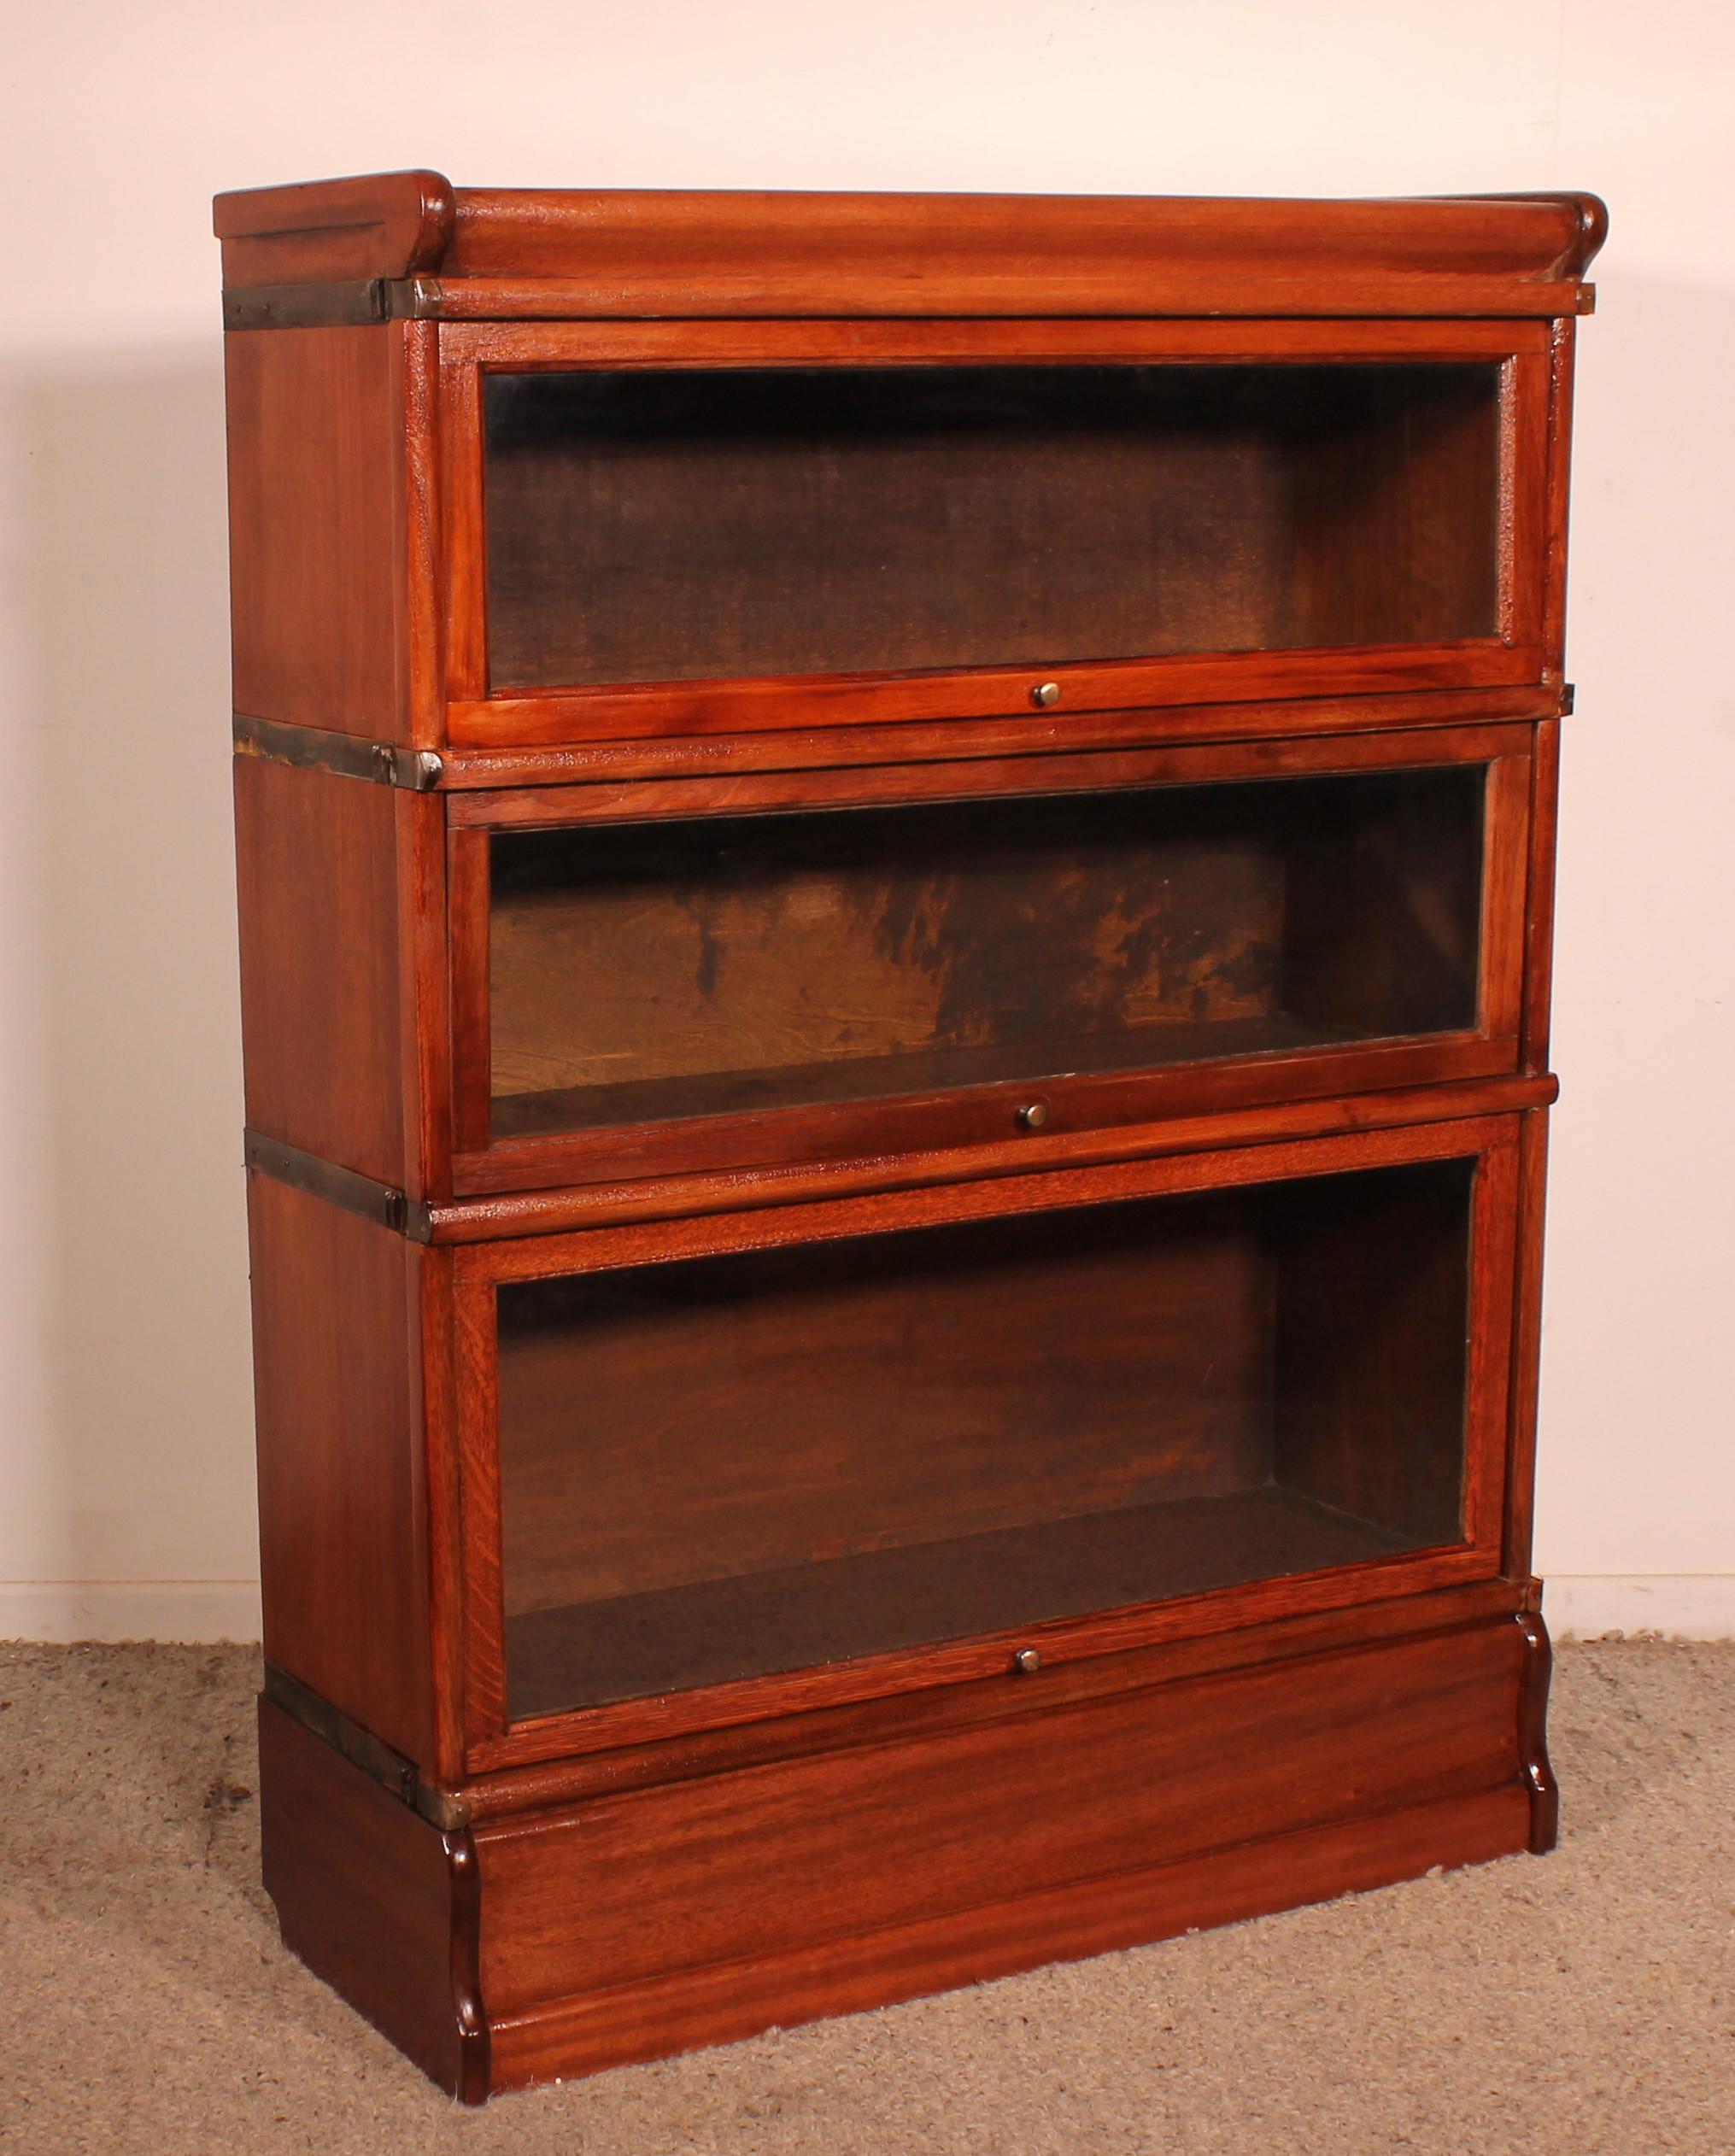 Elegant Globe Wernicke London mahogany bookcase from the end of the 19th century - Early 20th century  from England which has 3 elements

Small model which is composed of a molded base and top and 3 glazed elements

The windows slide inside the